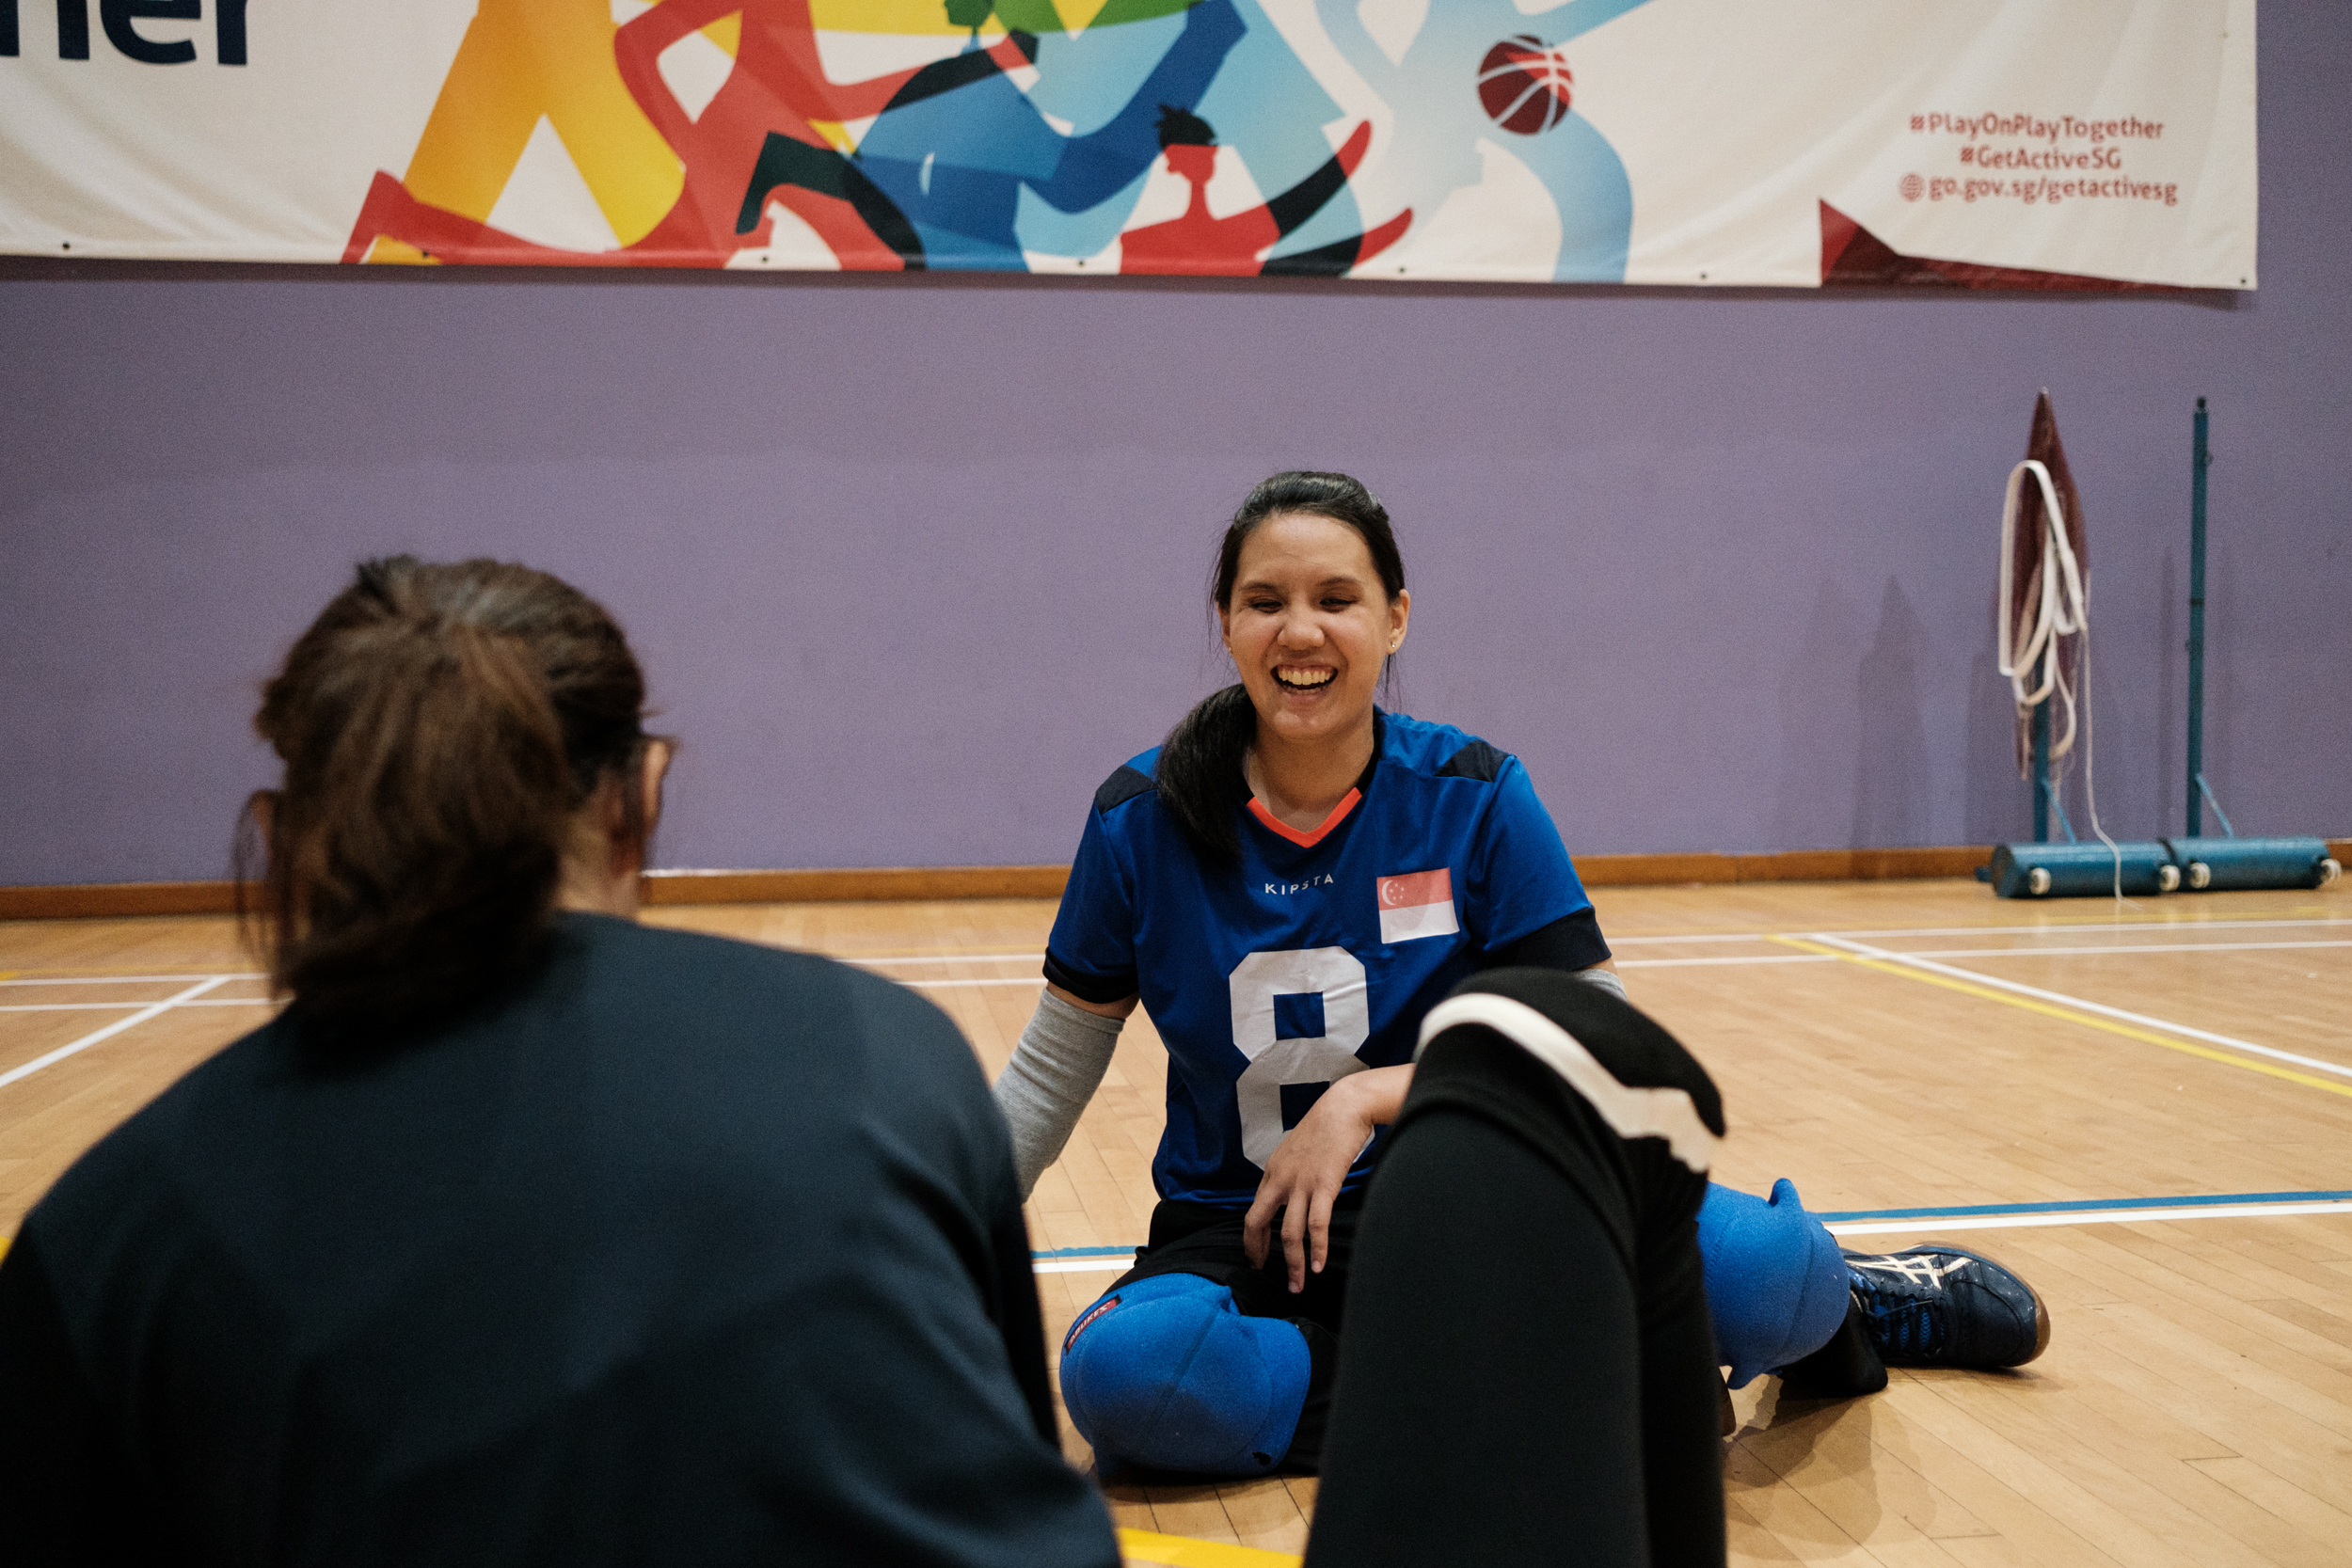 Joan Hung teaches our writer how to play goalball